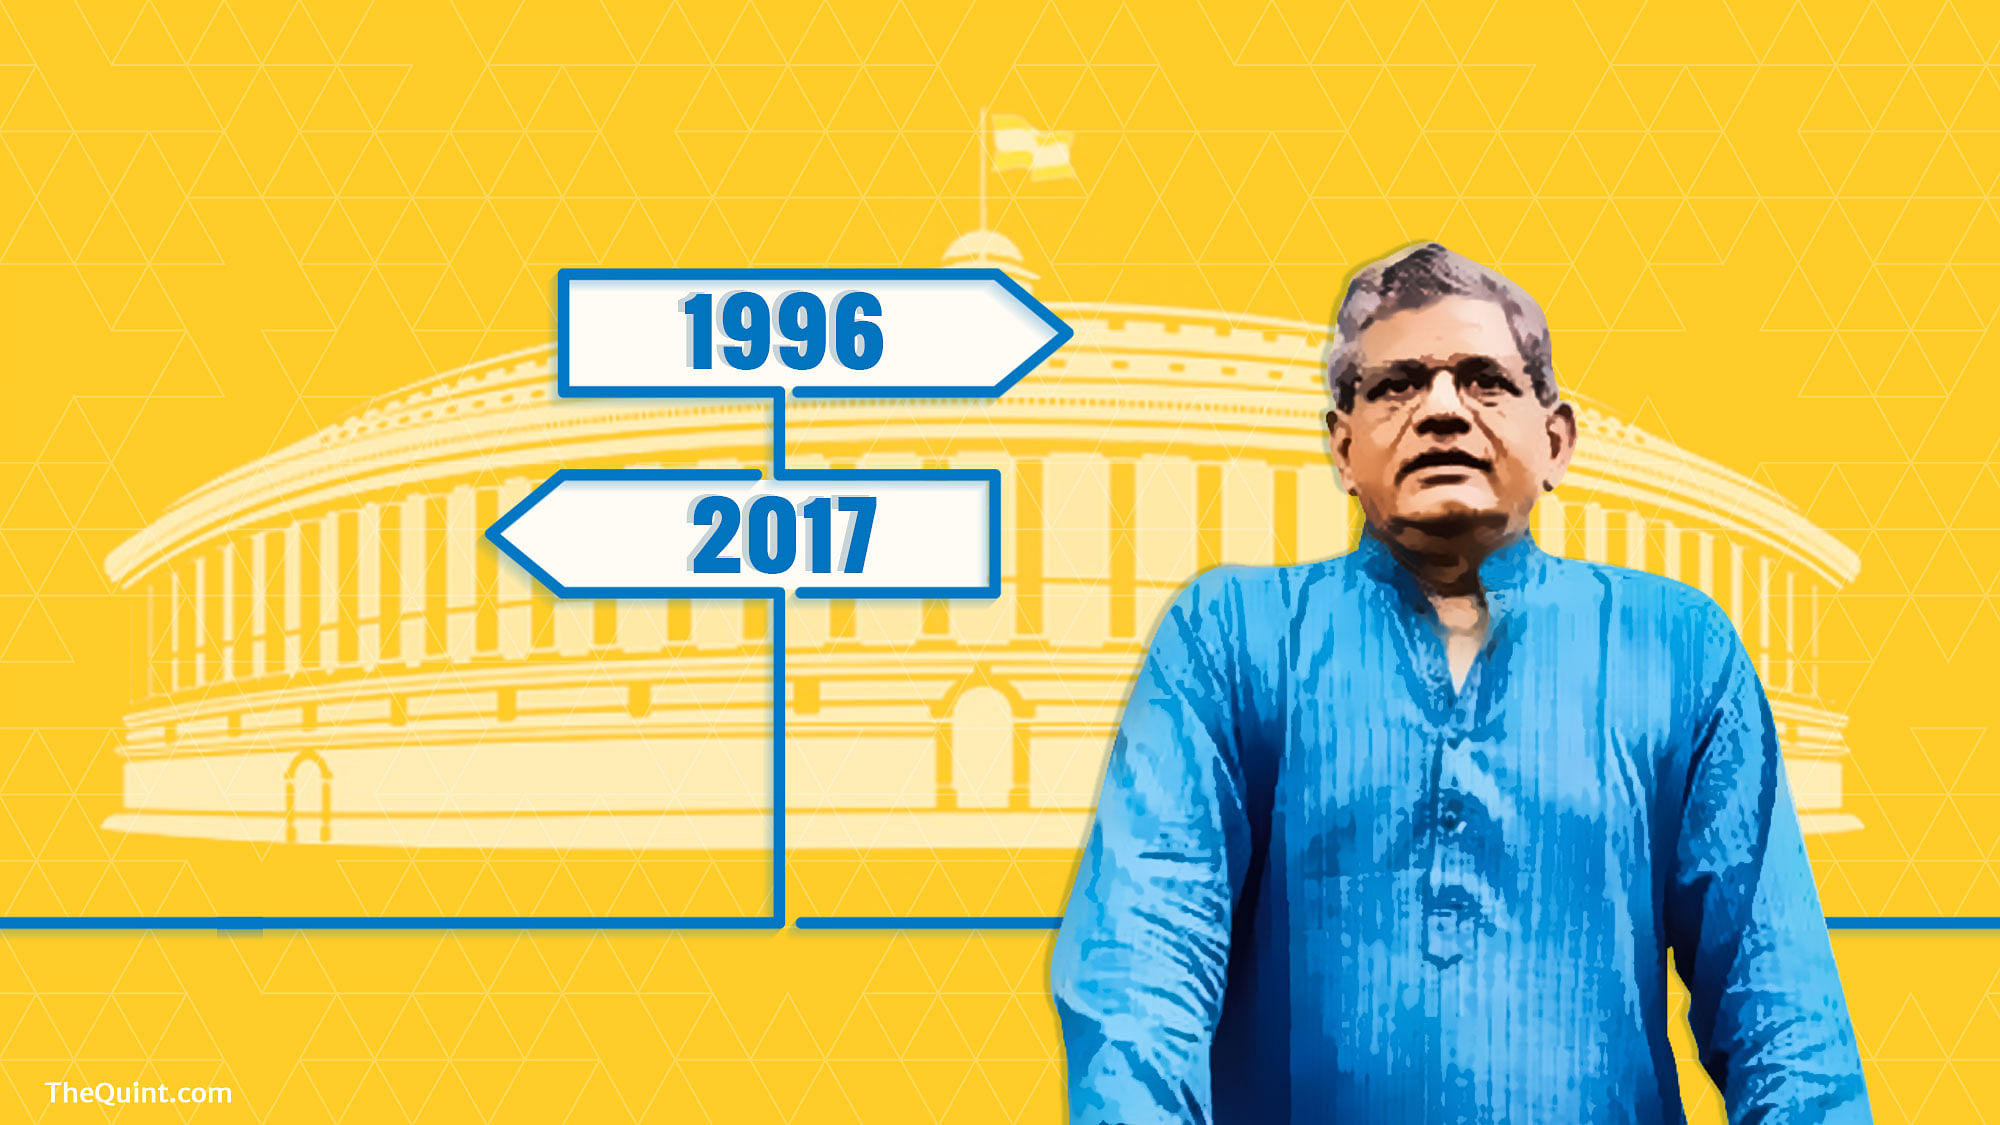 

CPI(M) commits another political blunder by not allowing Sitaram Yechury for a third term in the Rajya Sabha.